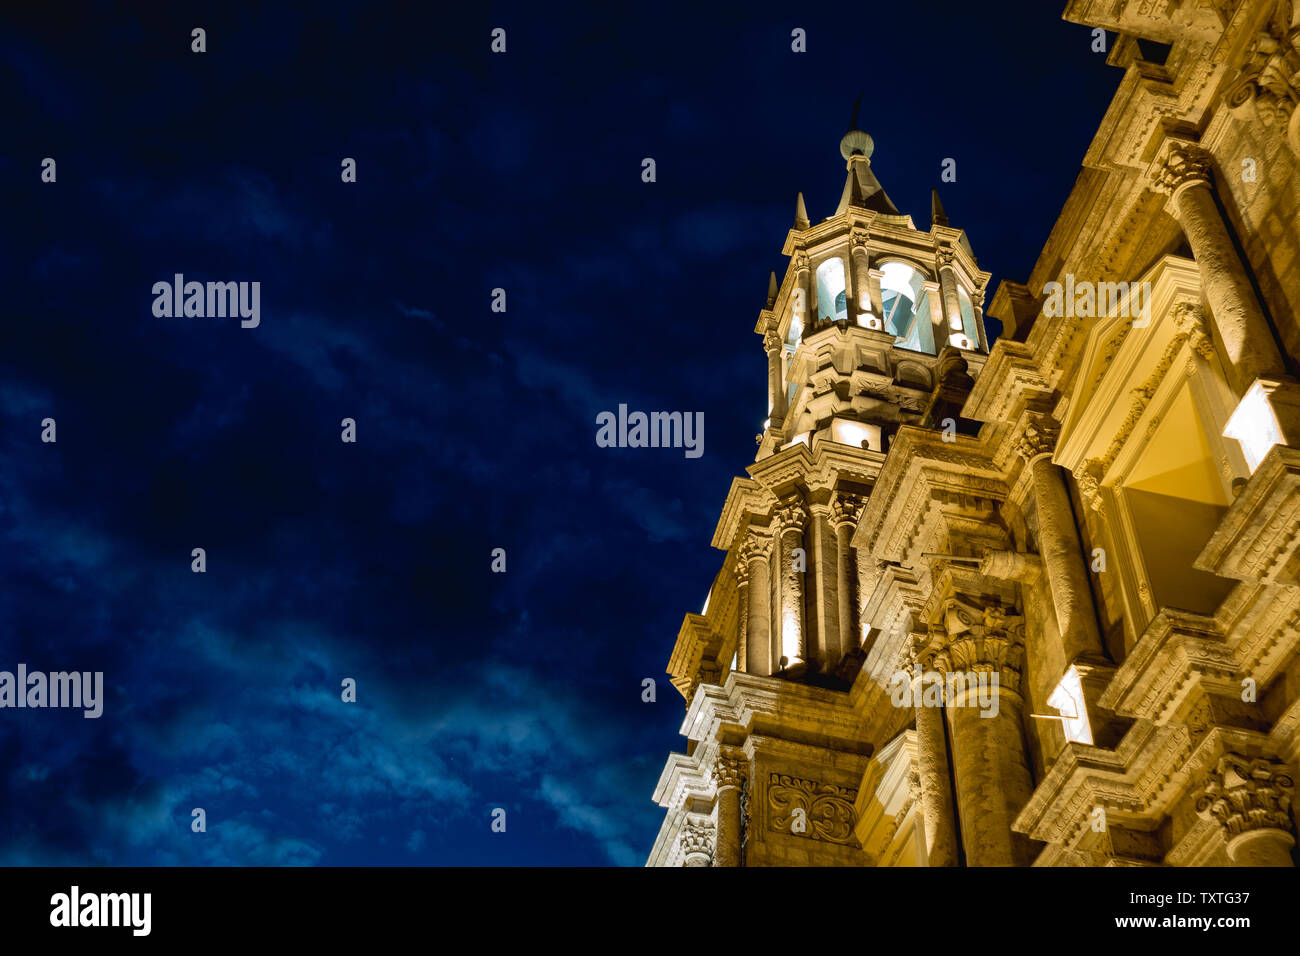 Basilica Cathedral of Arequipa, Peru. At night time, the sky was powerful. Stock Photo